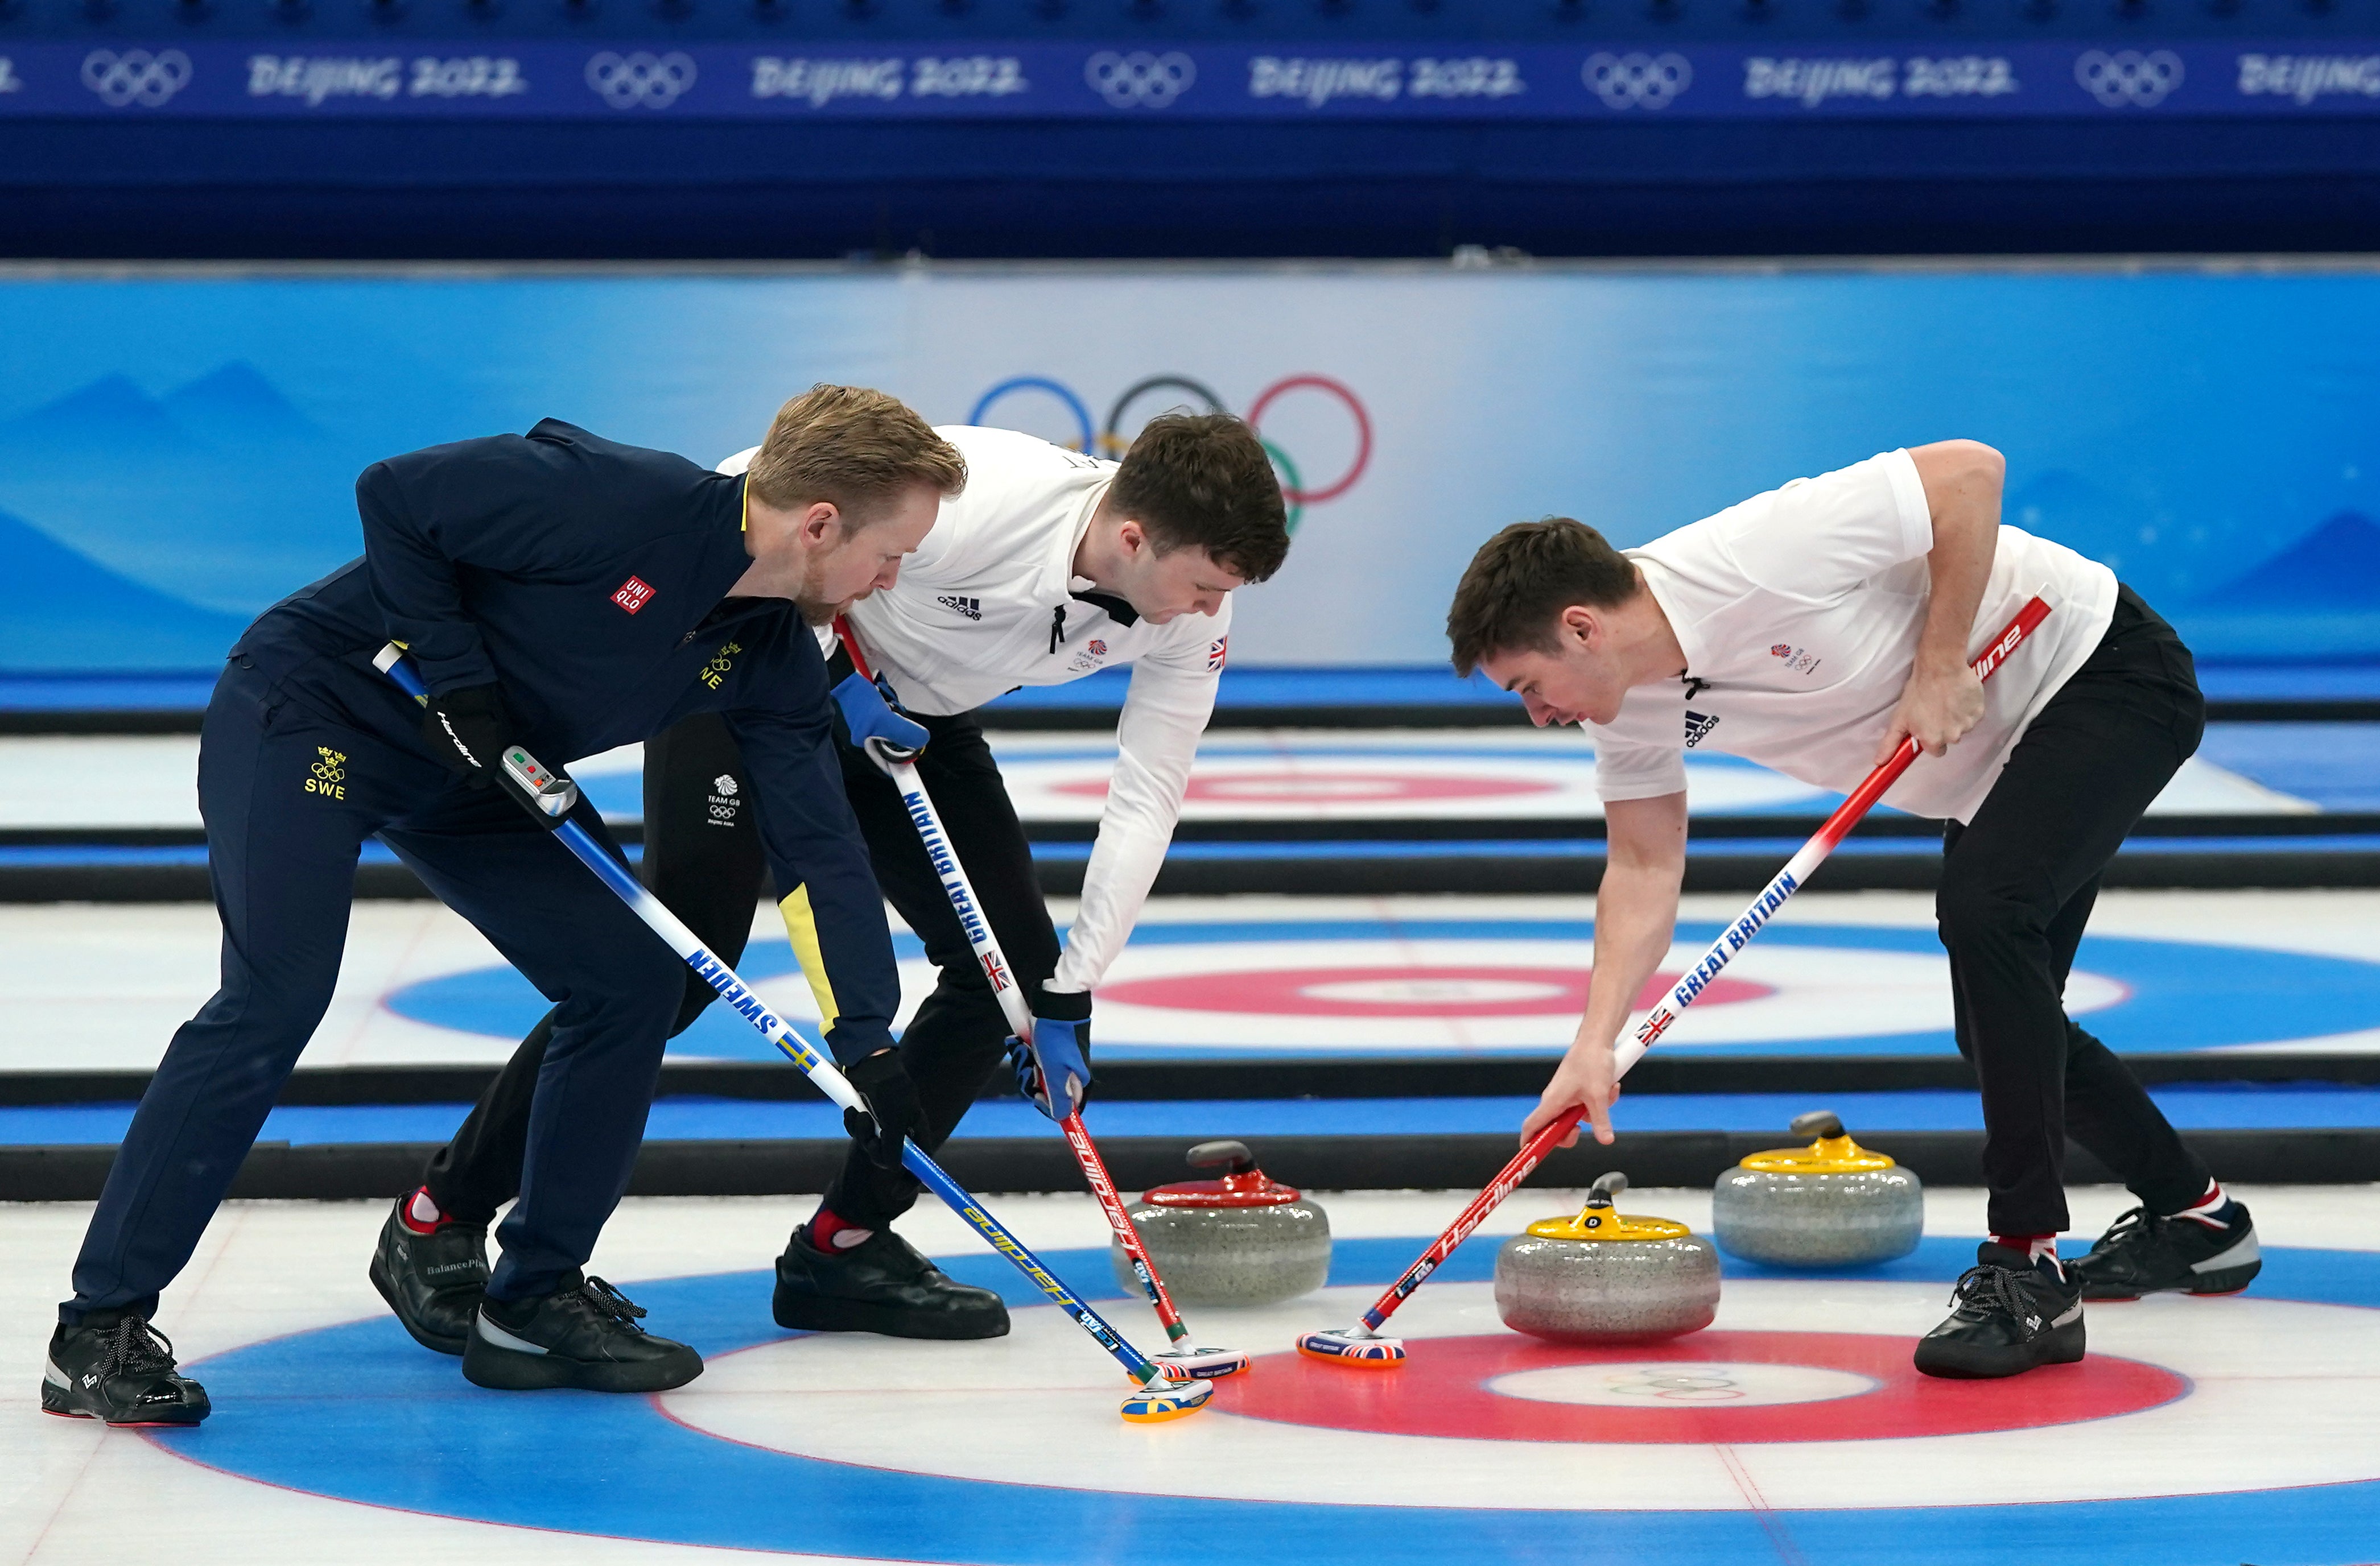 Family and friends thrilled as curlers win silver for first Team GB medal The Independent